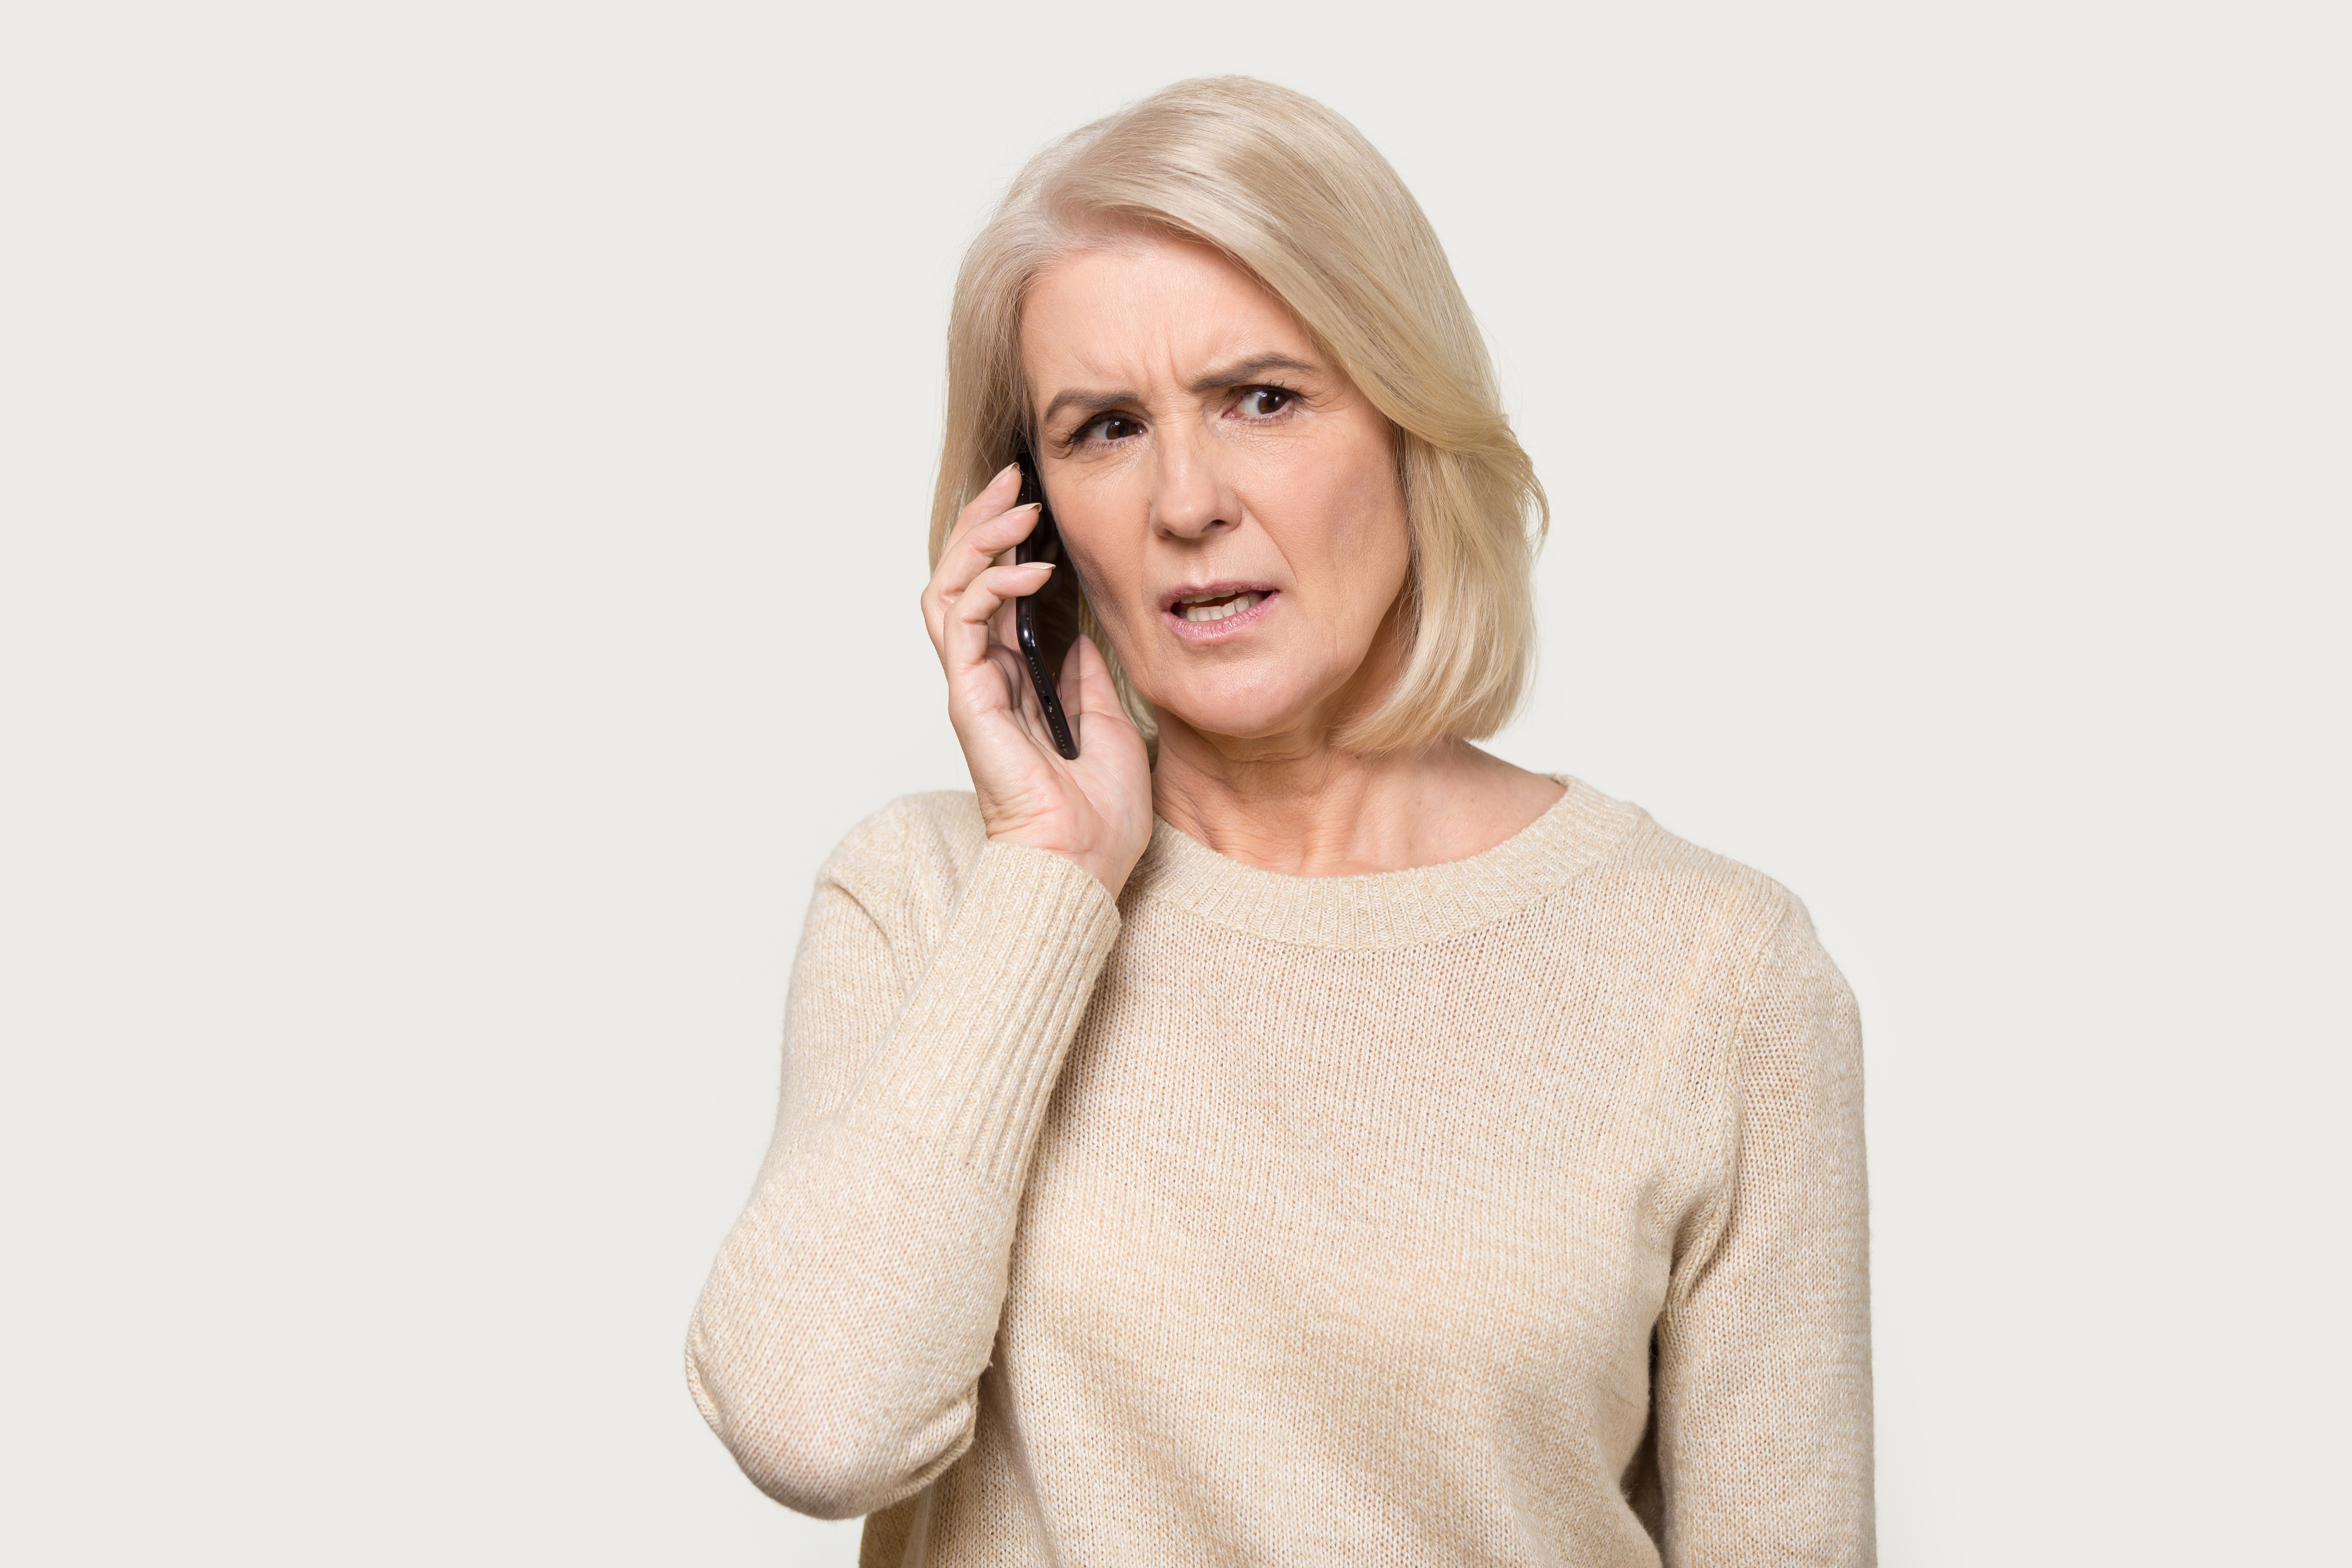 Woman talking on the phone with a worried expression | Source: Shutterstock